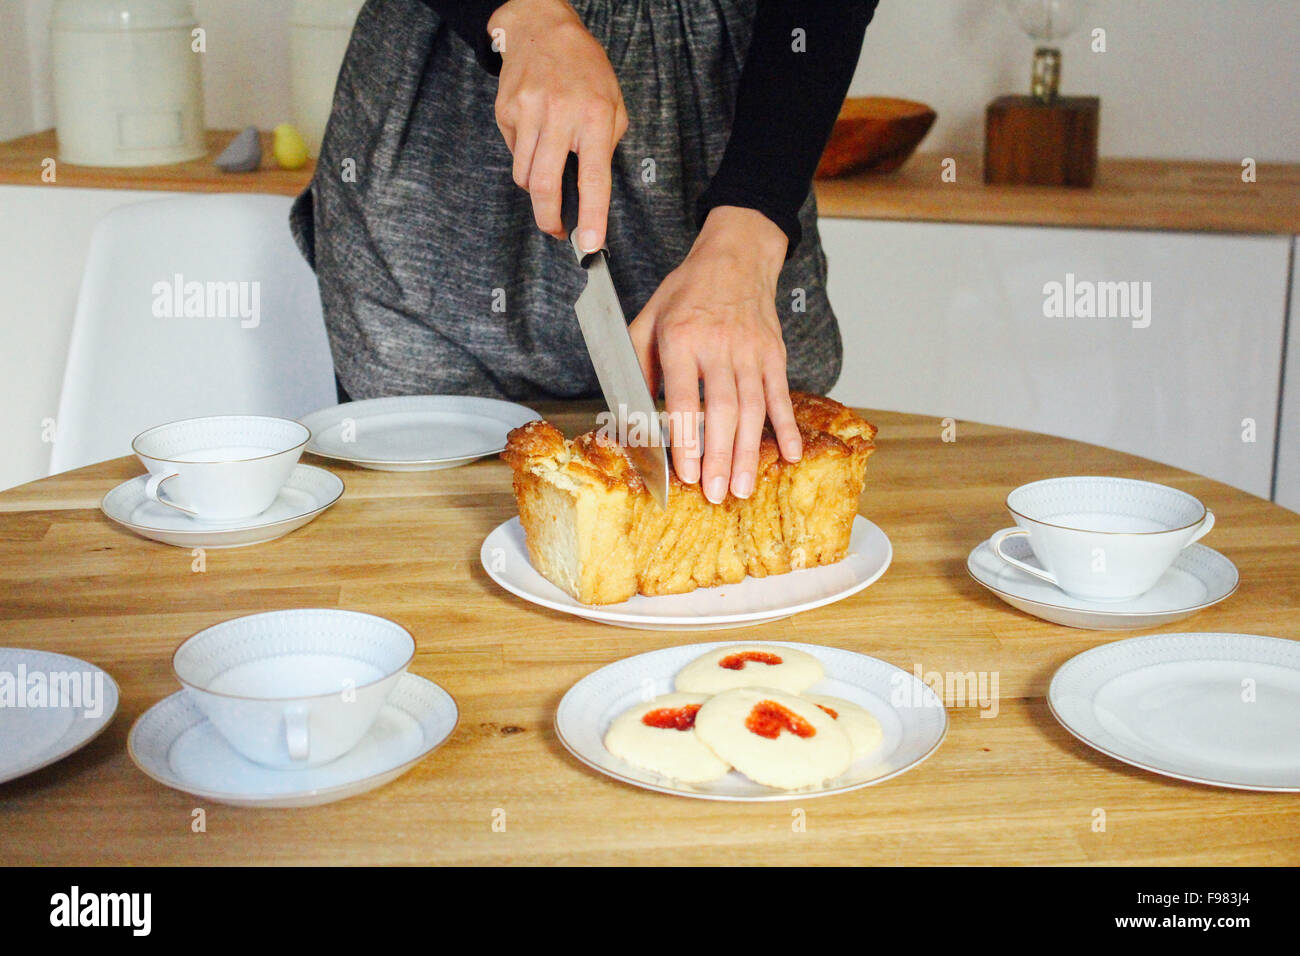 Woman Cutting Bread On Table Stock Photo